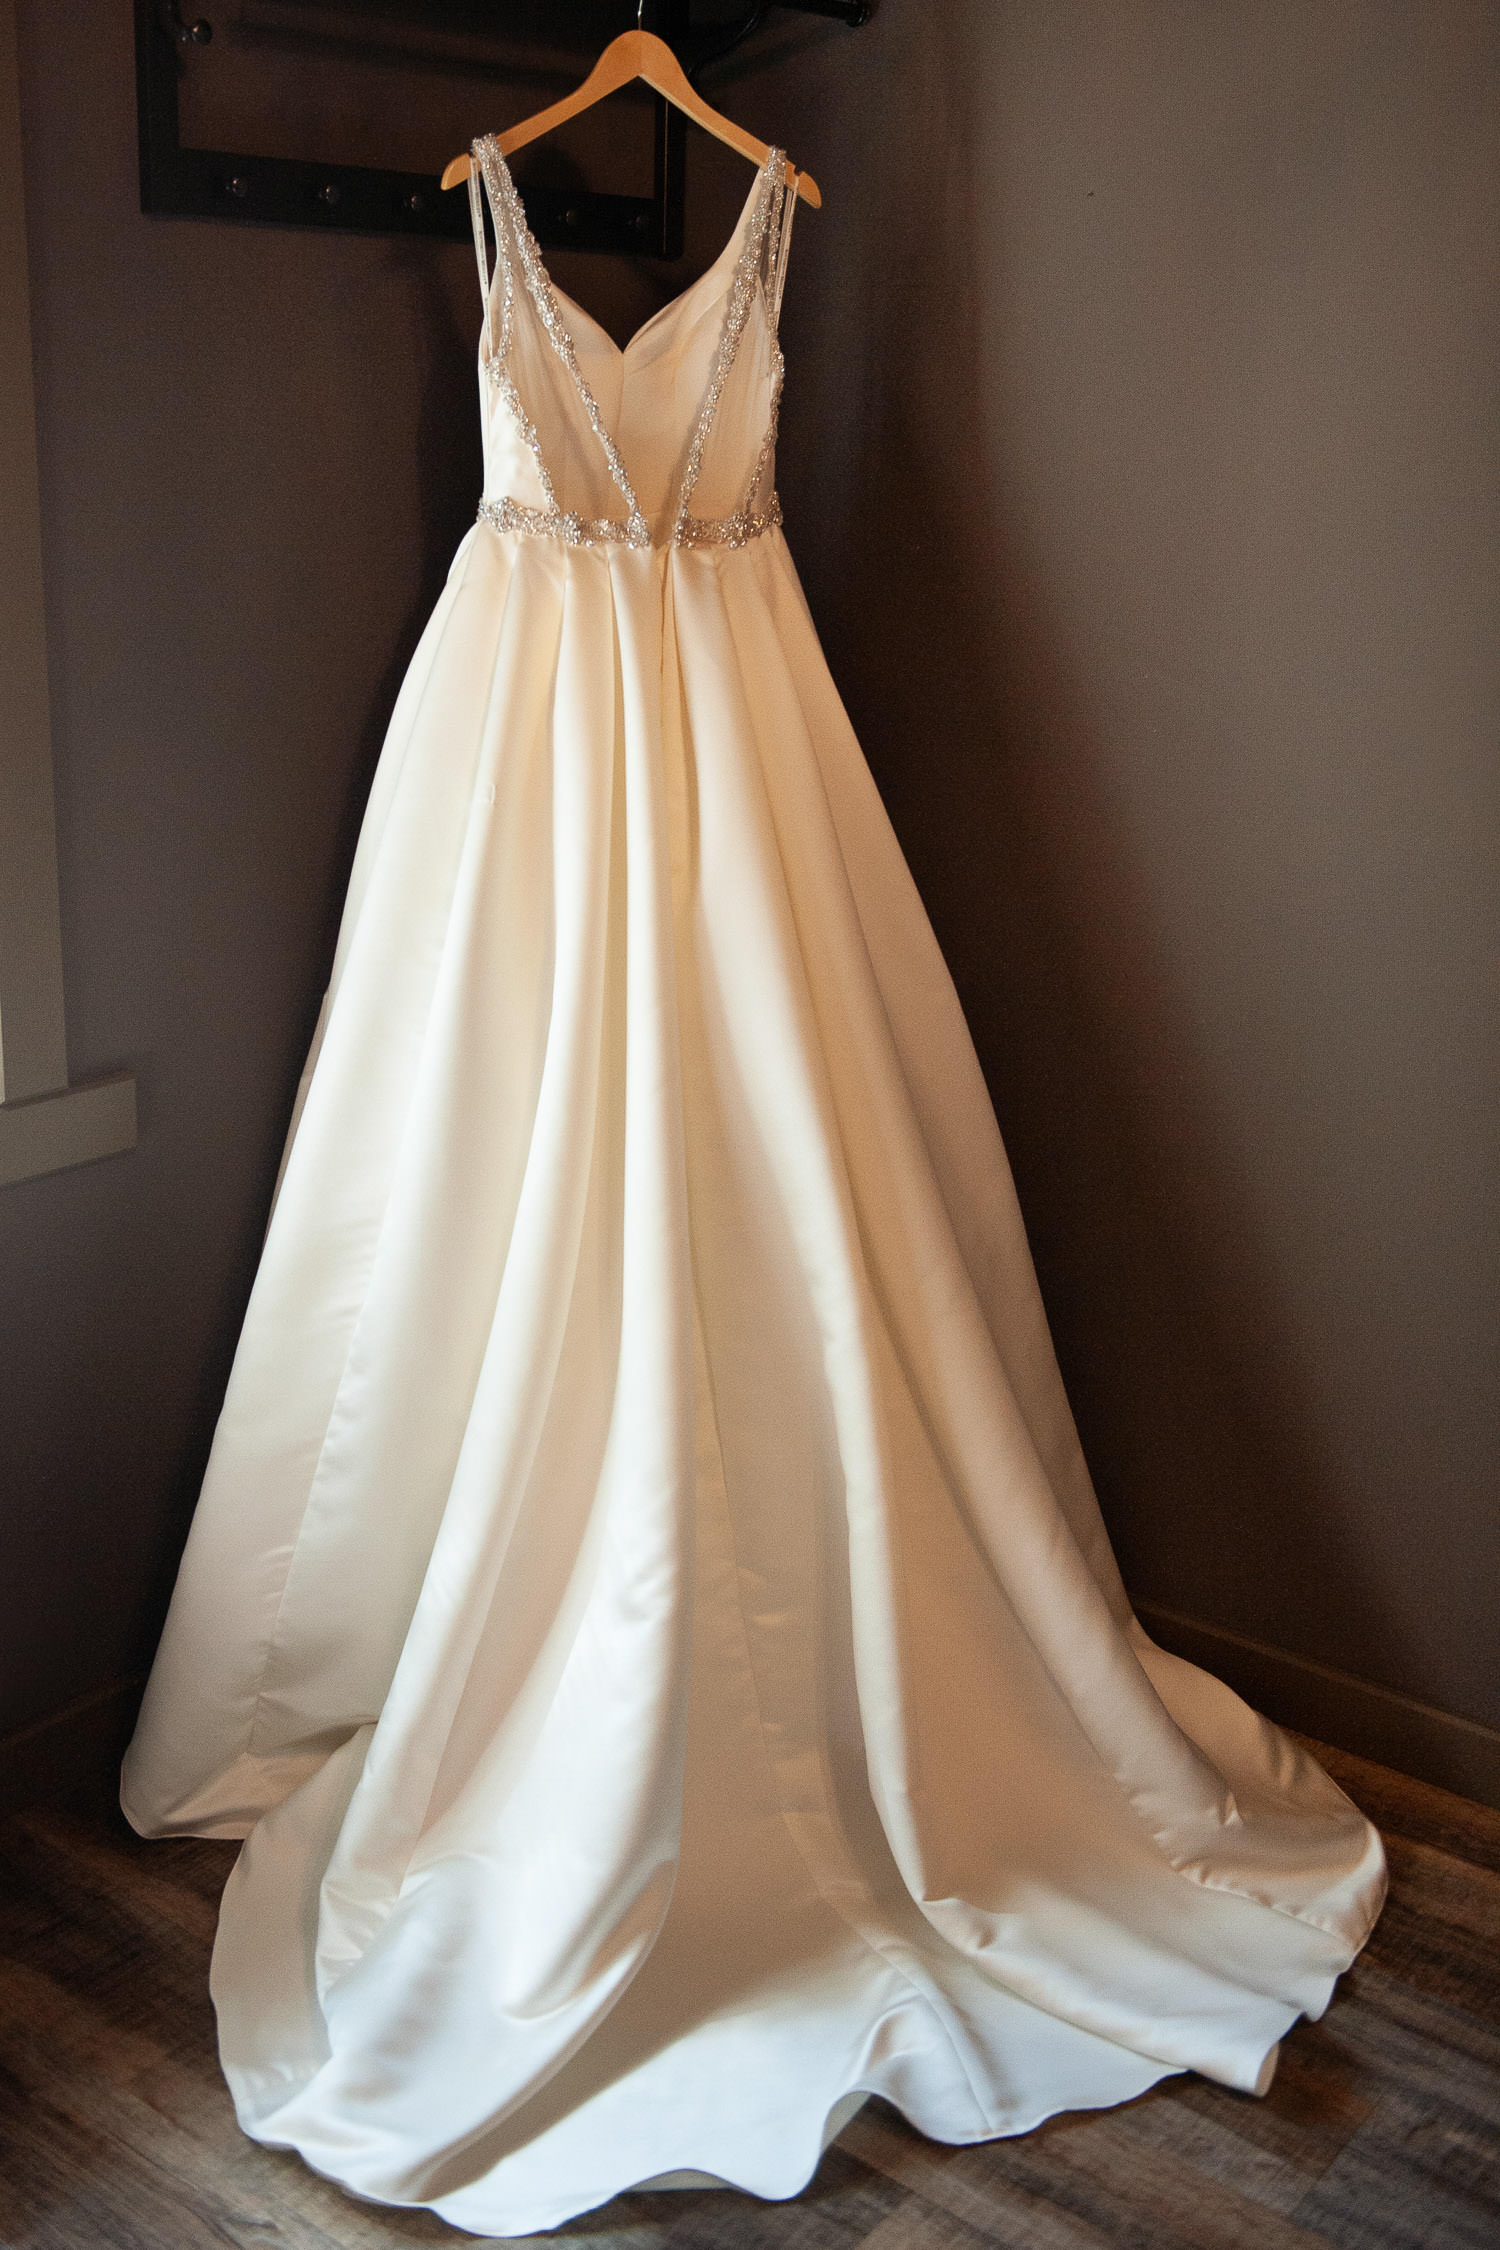 Bride's gown before her Creekside Villa wedding captured by Tara Whittaker Photography